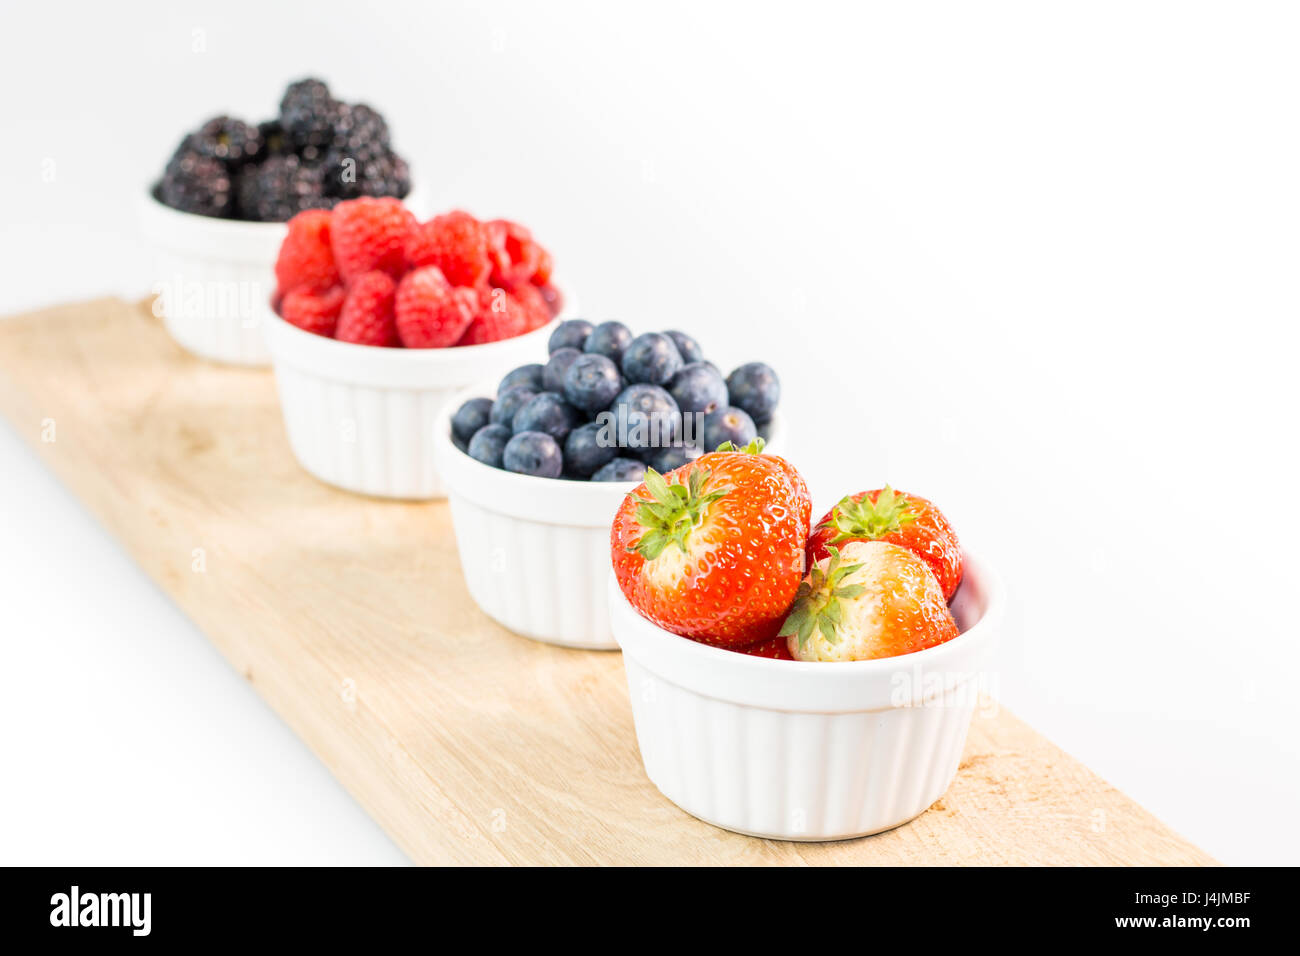 Strawberries, blueberries, raspberries and blackberries on wooden cutting board with shallow depth of field Stock Photo